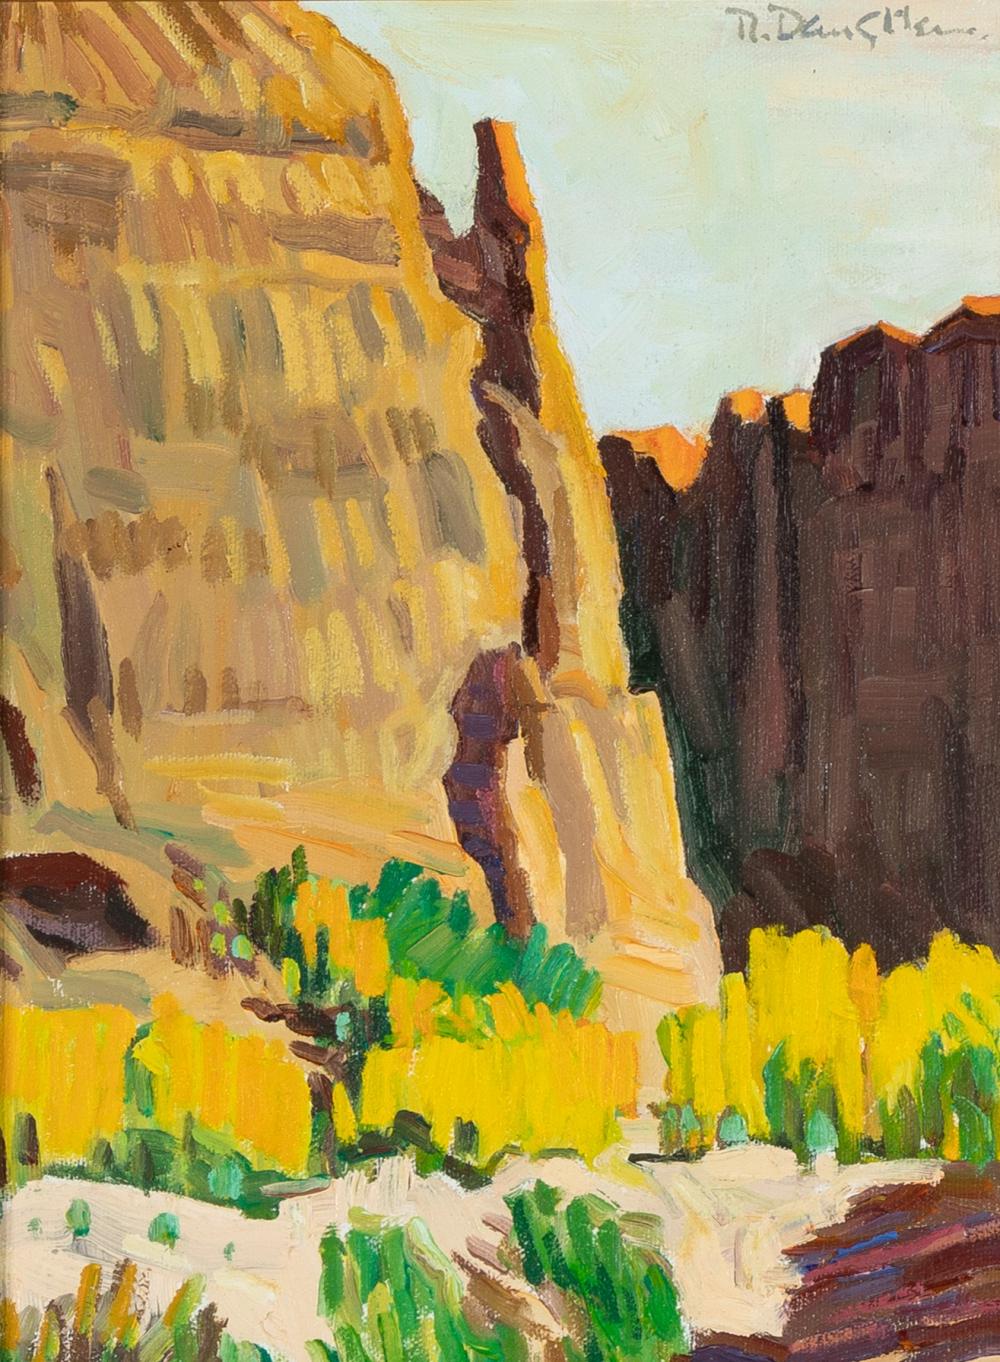 ROBERT DAUGHTERS UNTITLED CANYON 36335f